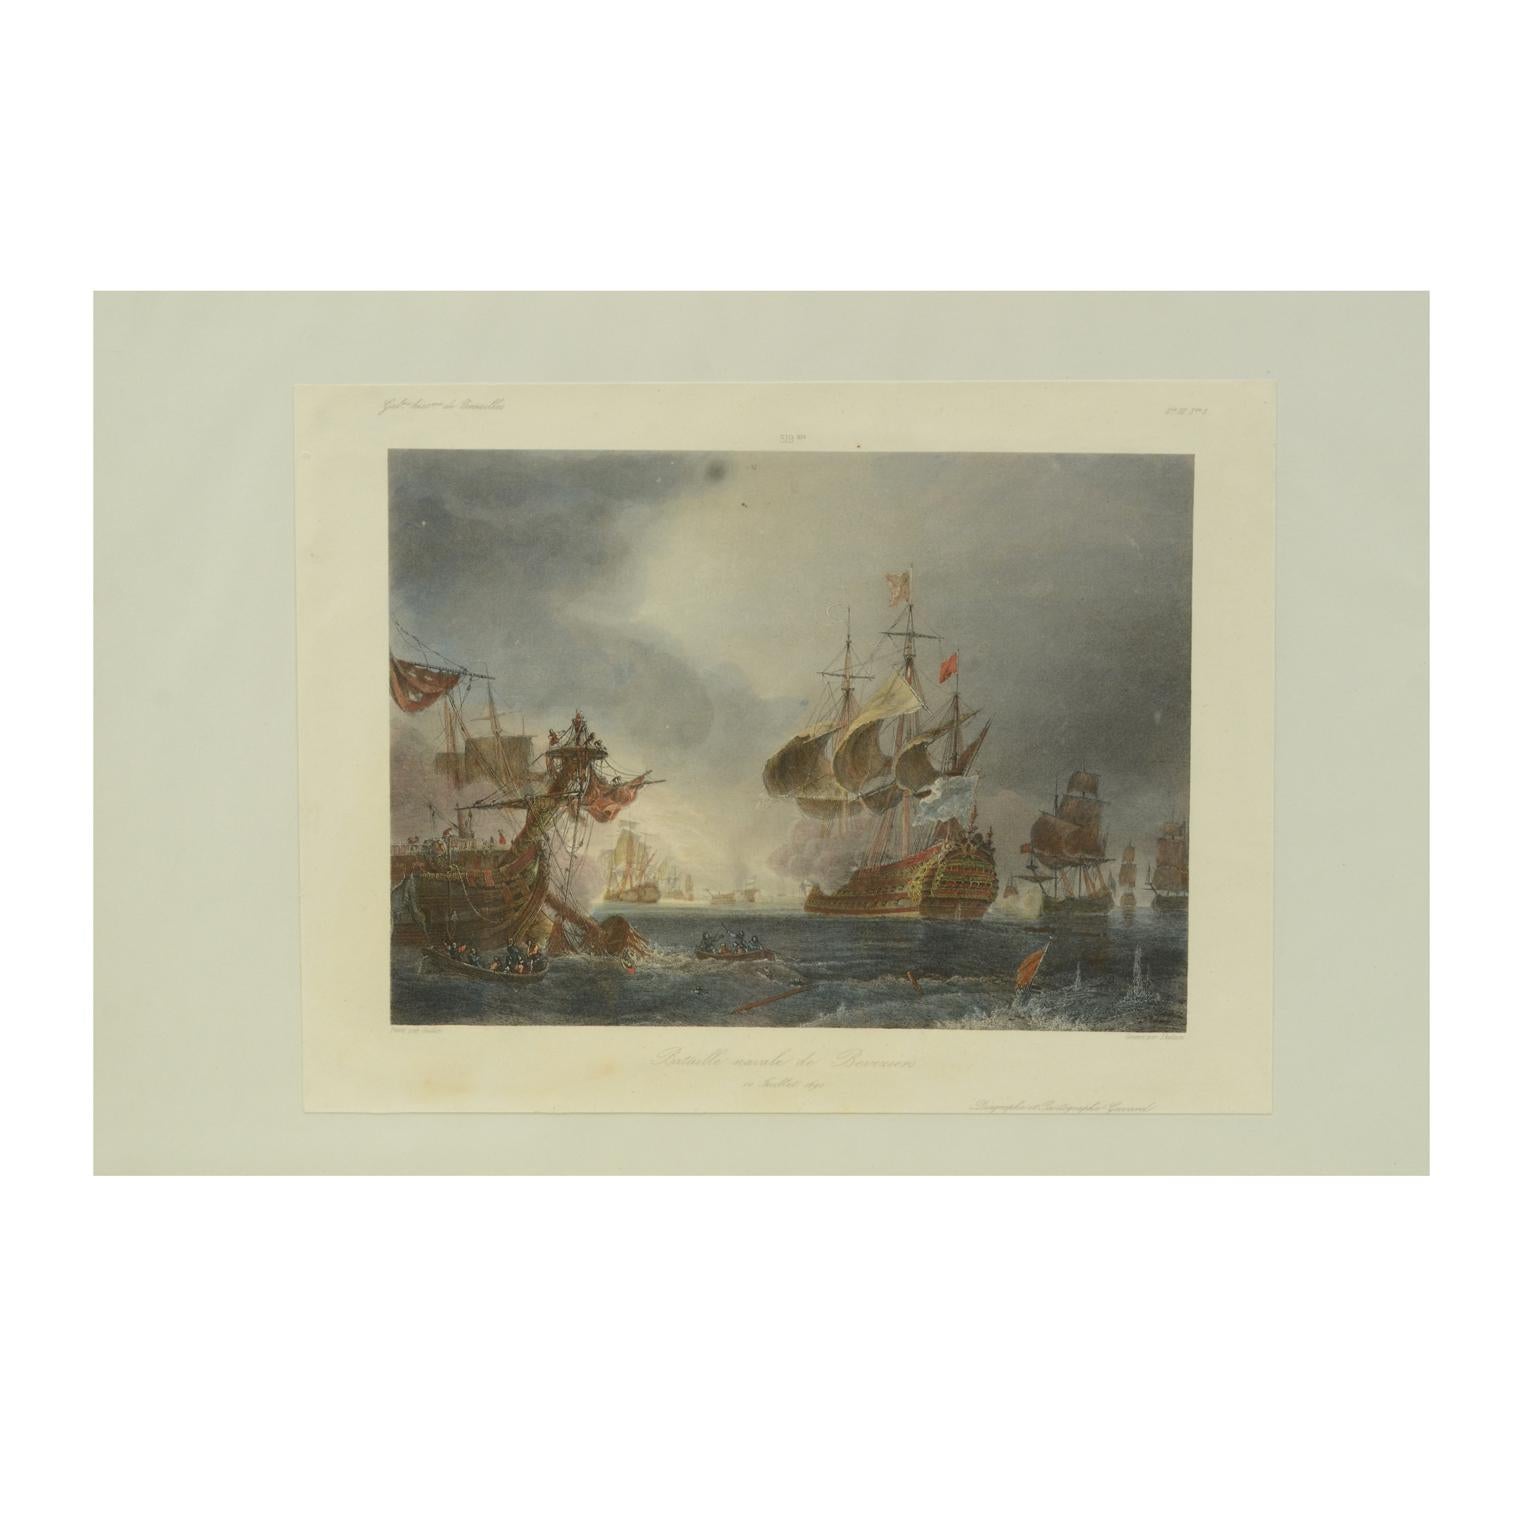 Lithographic print of the Naval Battle of Beziers on 10th July 1690, taken from the book Historical Gallery of Versailles 319bis. Skelton is the engraver. Original print by Victor Gilbert Théodore Gudin, (1802-1880). French manufacture, early 1900s.